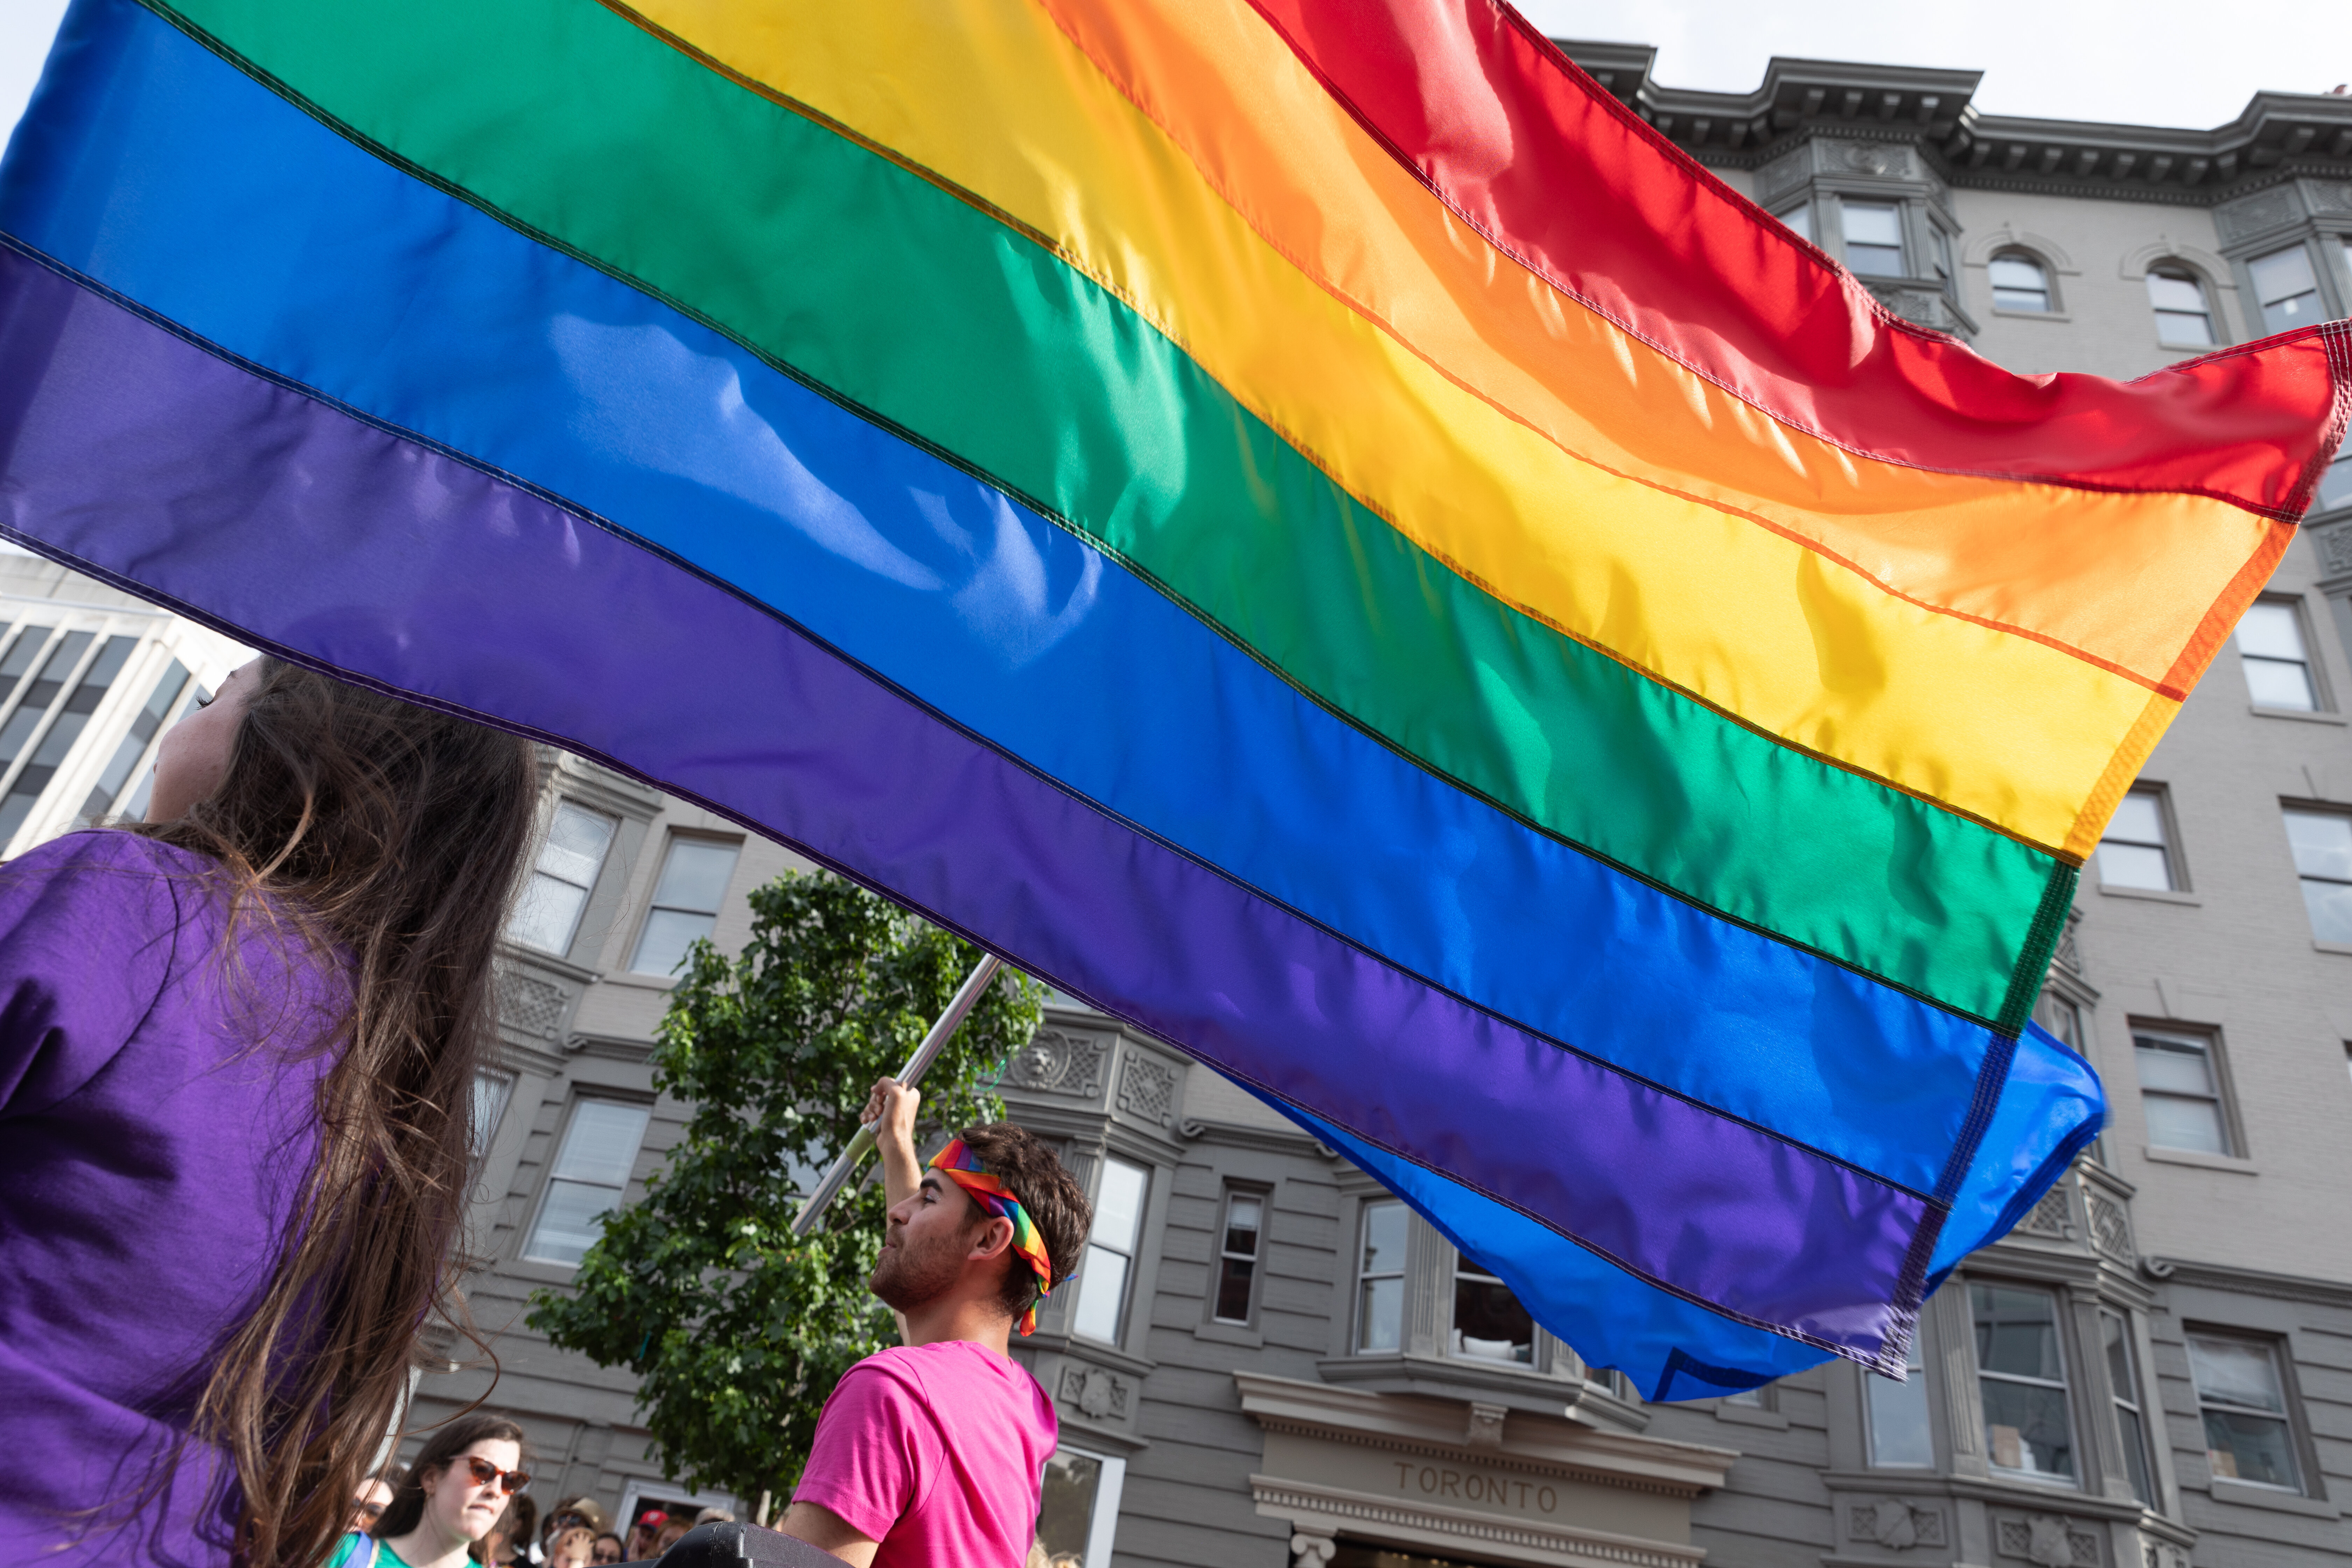 Government Contractors Could Refuse LGBTQ Workers Under New Religious Exemption